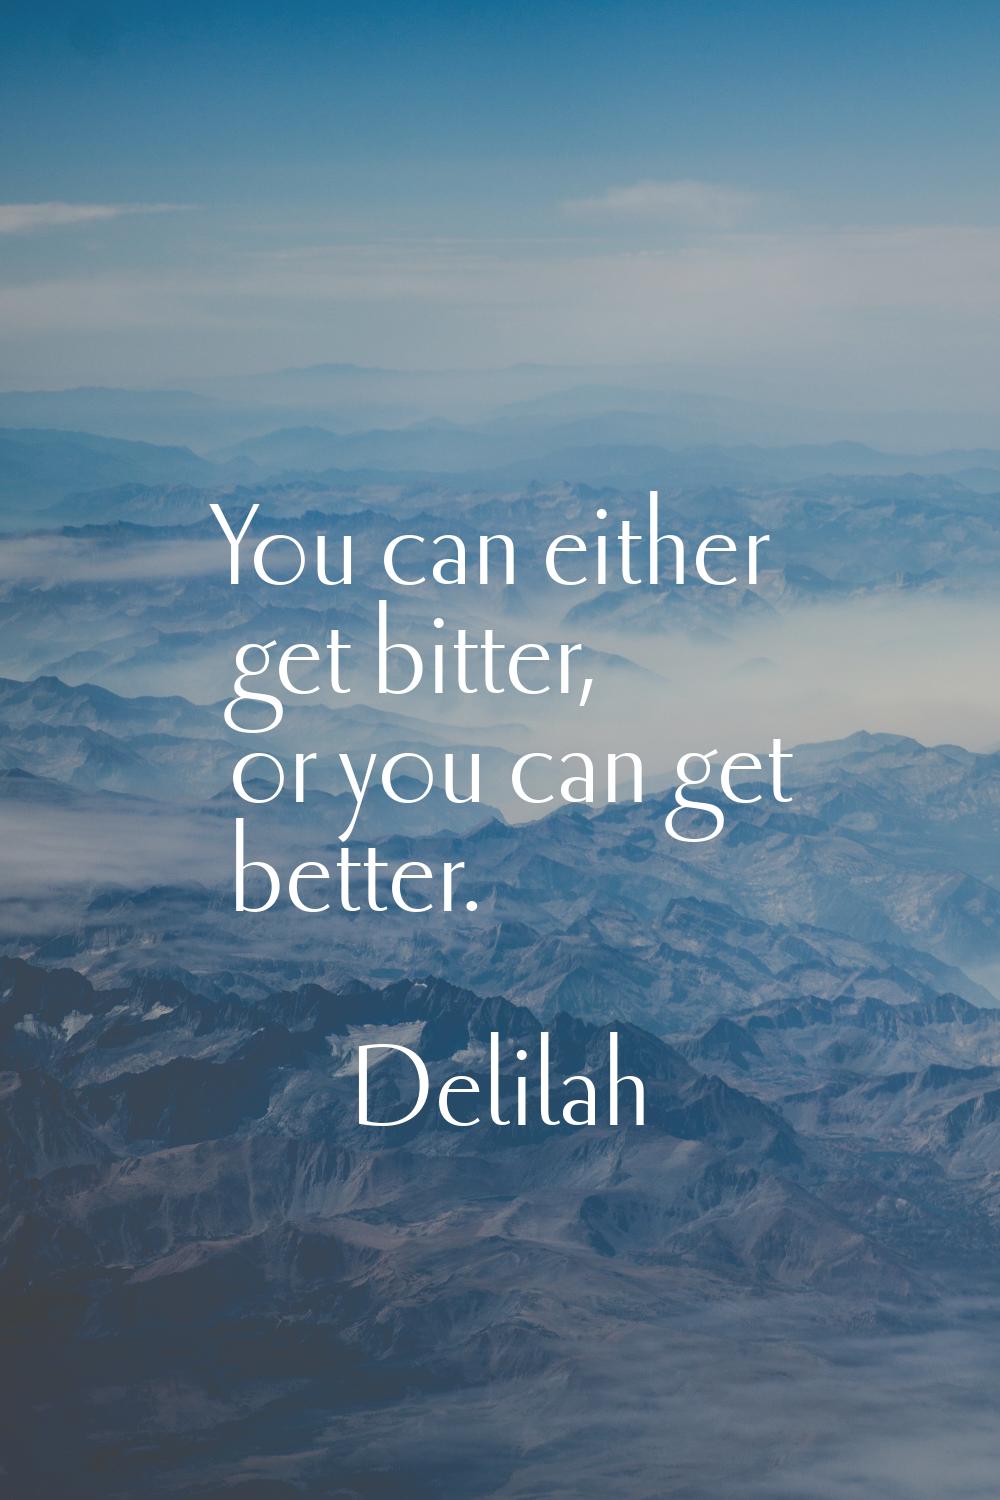 You can either get bitter, or you can get better.